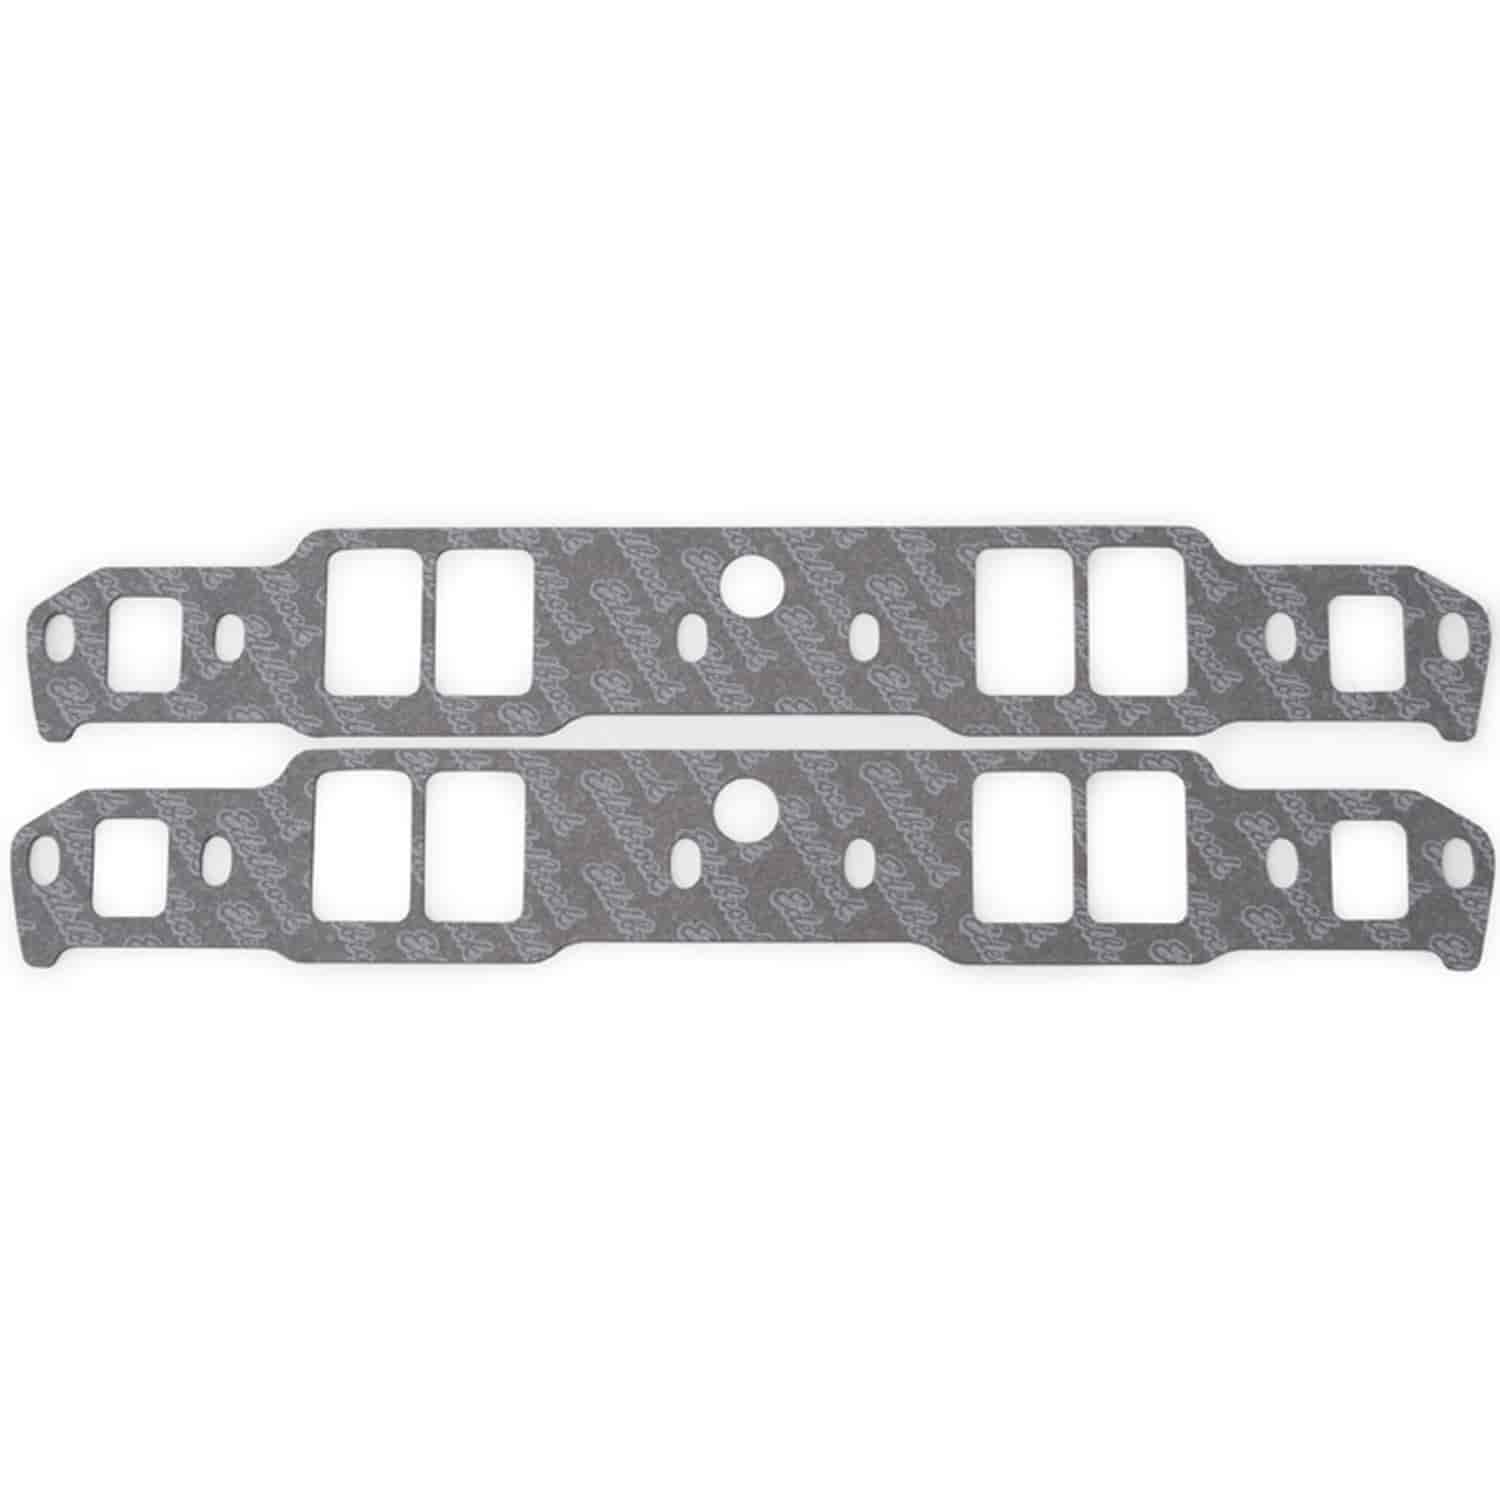 Intake Gaskets for Small Block Chevy with 23